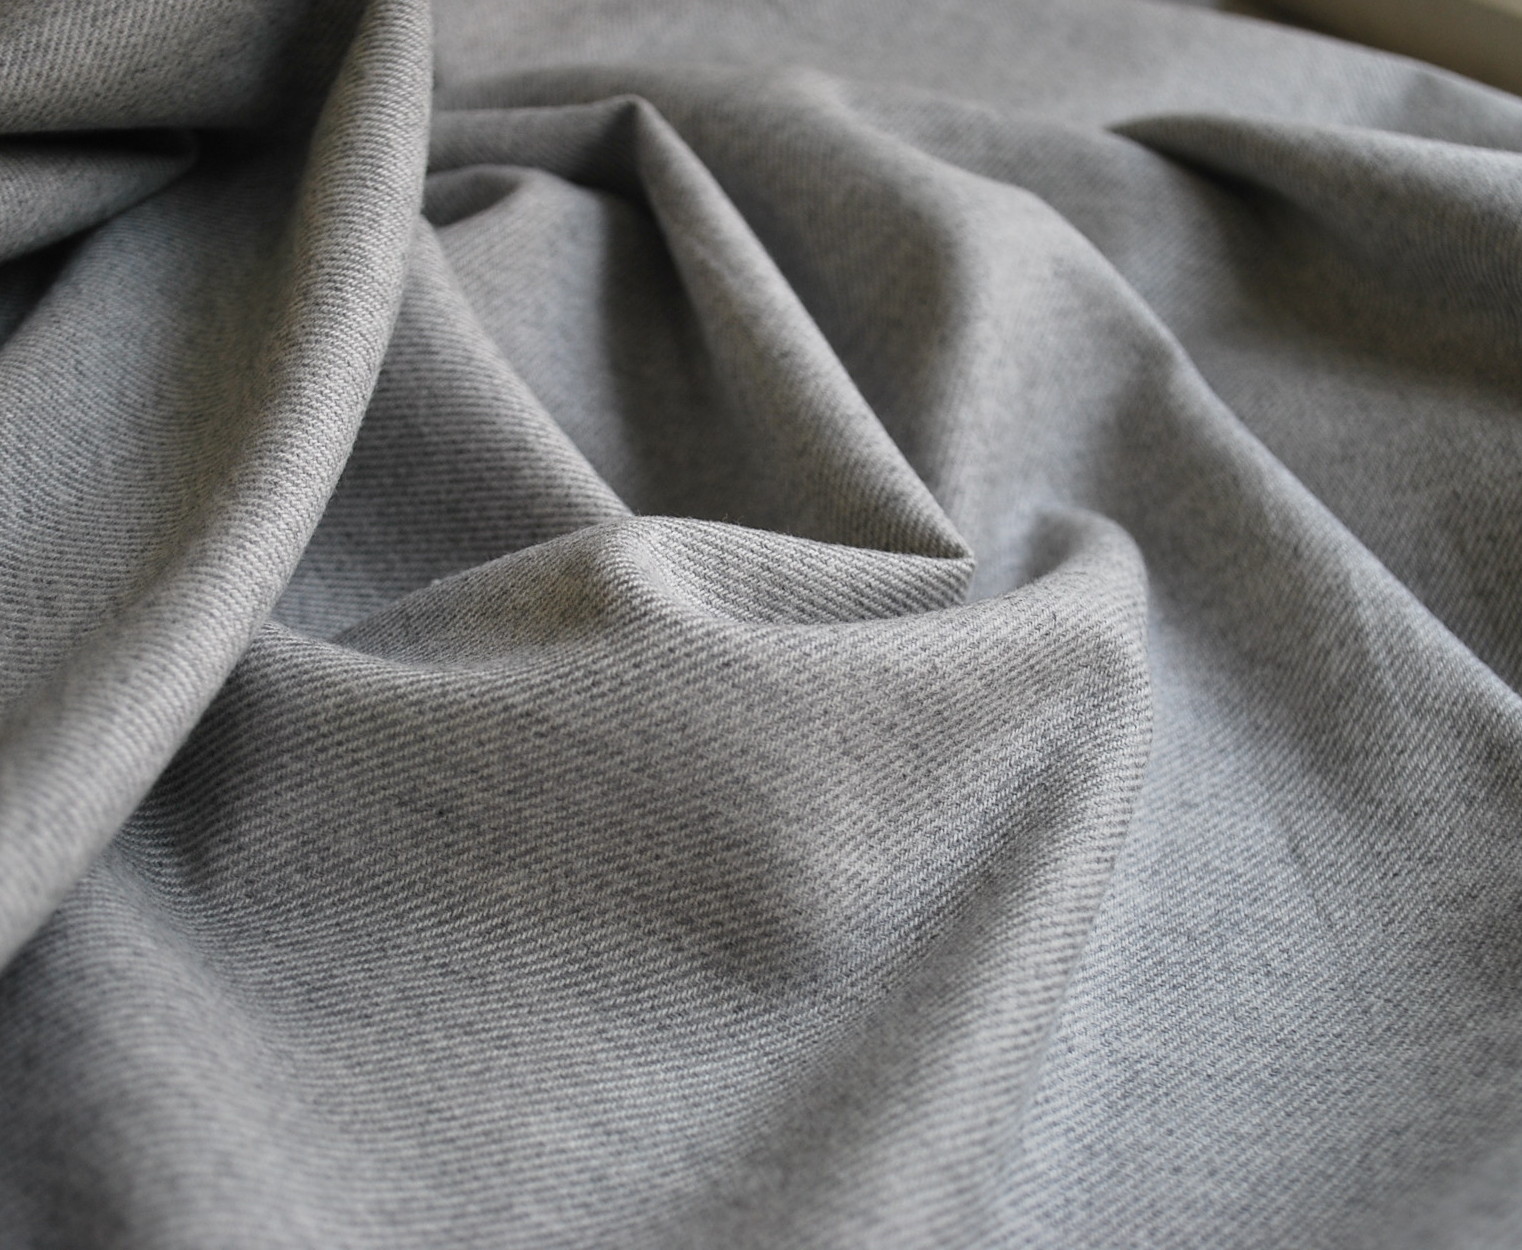 https://www.croftmill.co.uk/images/pictures/scans-of-fabric/2012/sept-2012/ambrose_grey-brushed-cotton-fabric.jpg?v=91d940a0